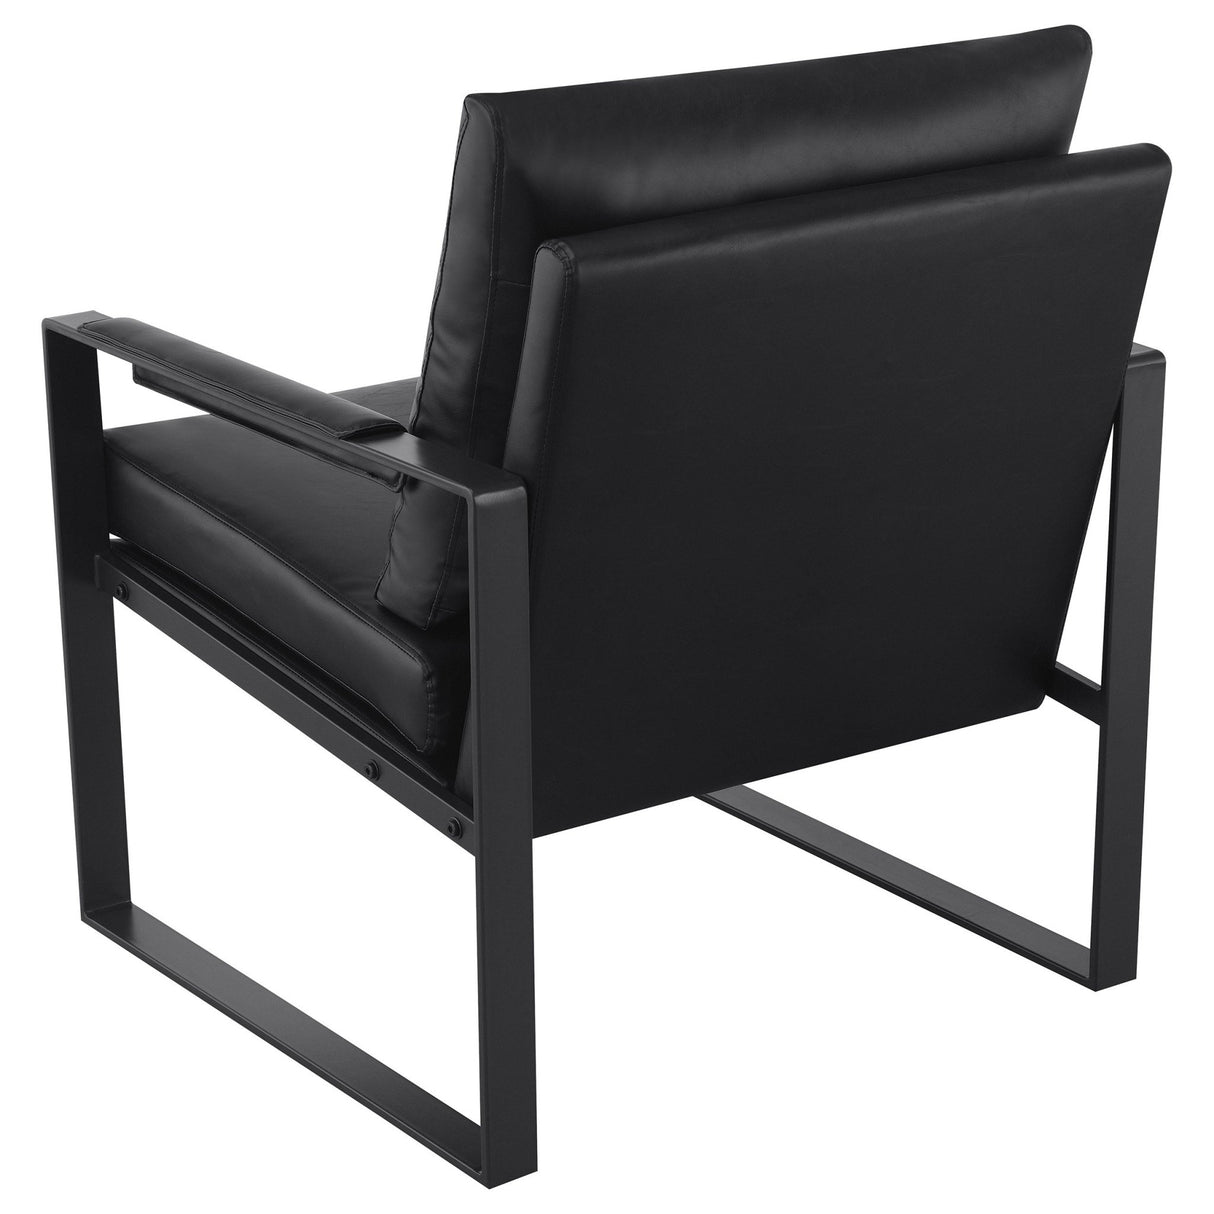 Accent Chair - Rosalind Upholstered Track Arms Accent Chair Black and Gummetal - Accent Chairs - 903021 - image - 5